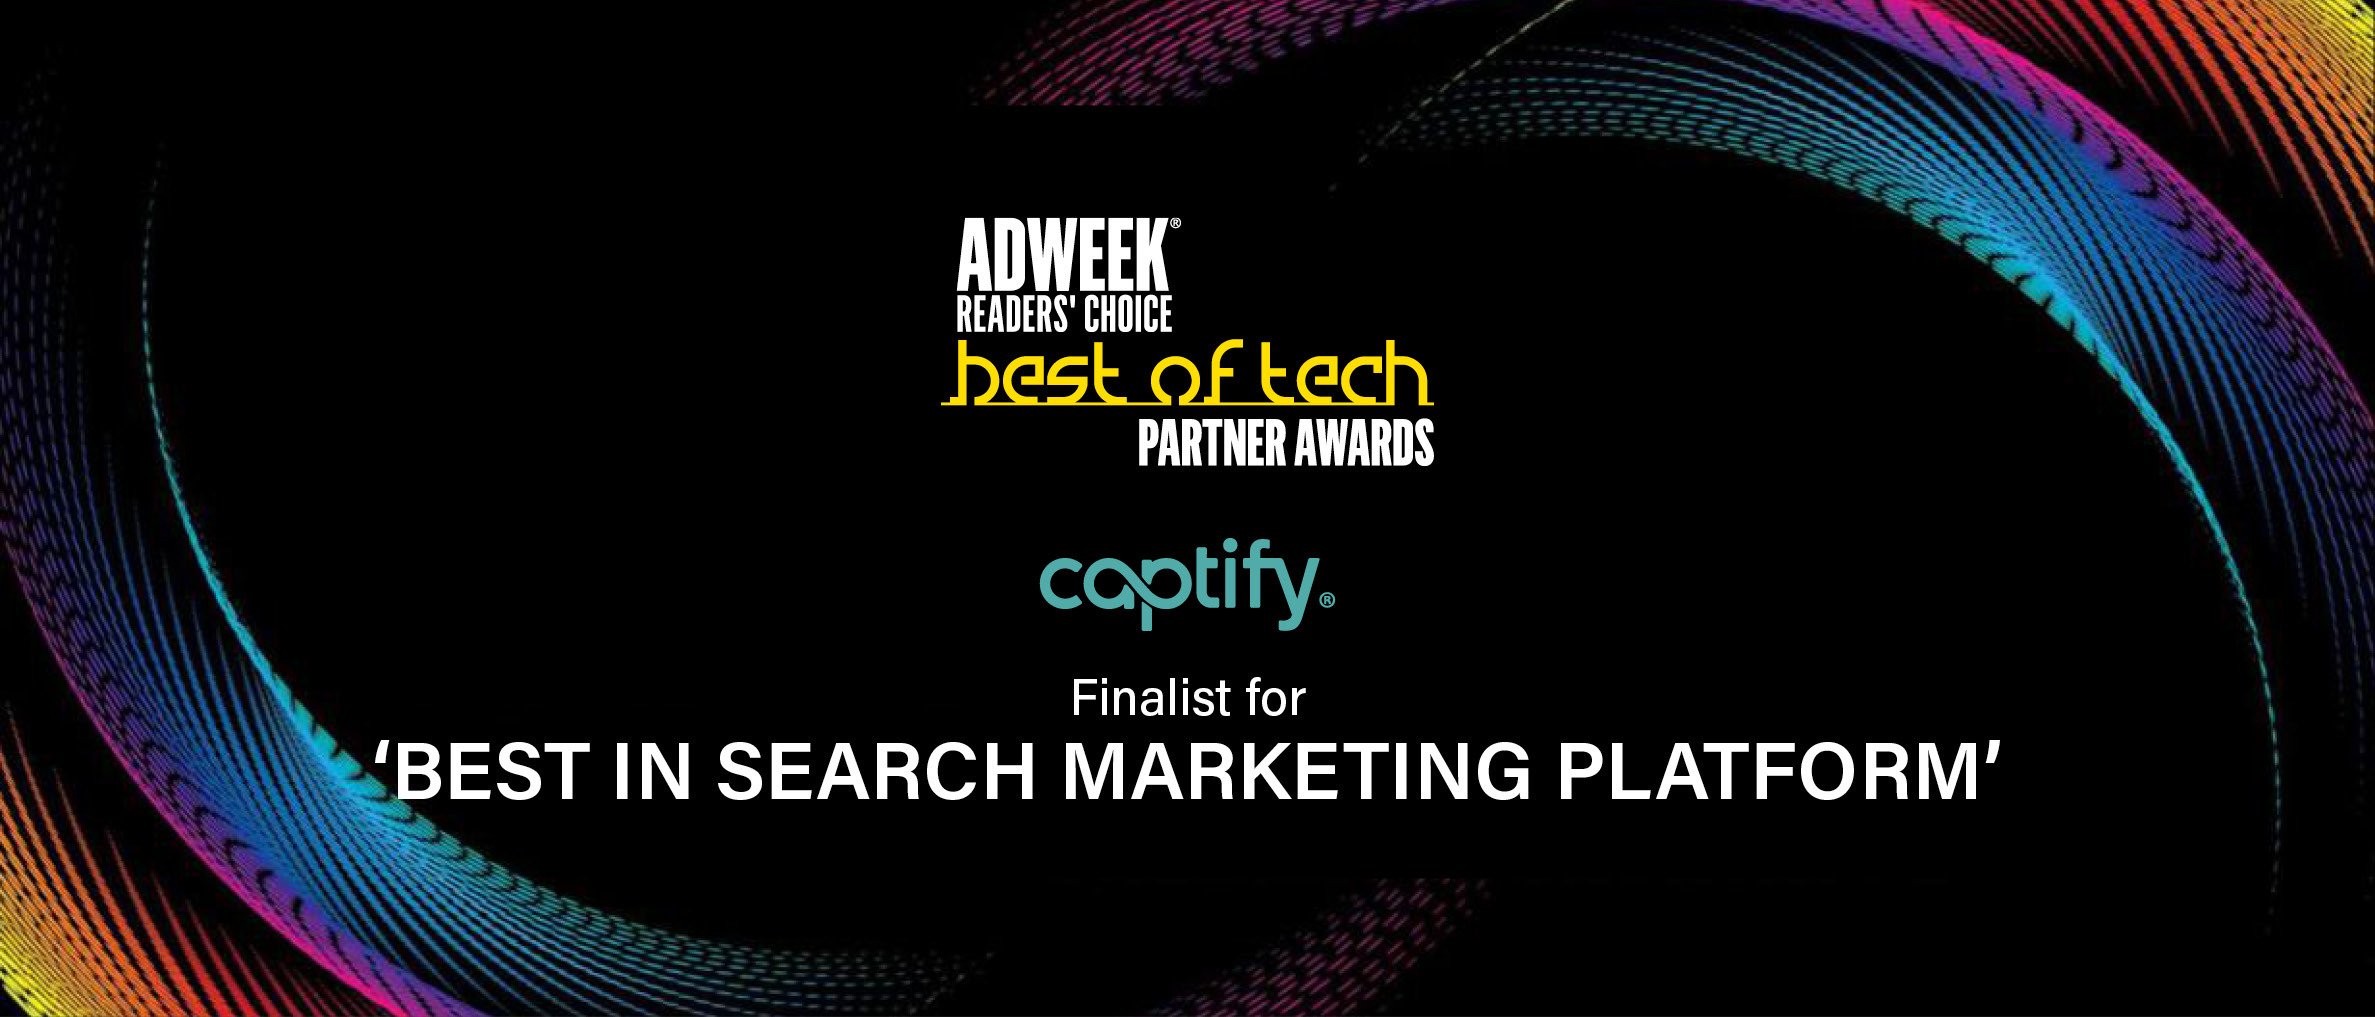 Captify Is Named A Finalist For Adweek’s Best Of Tech Partner Awards